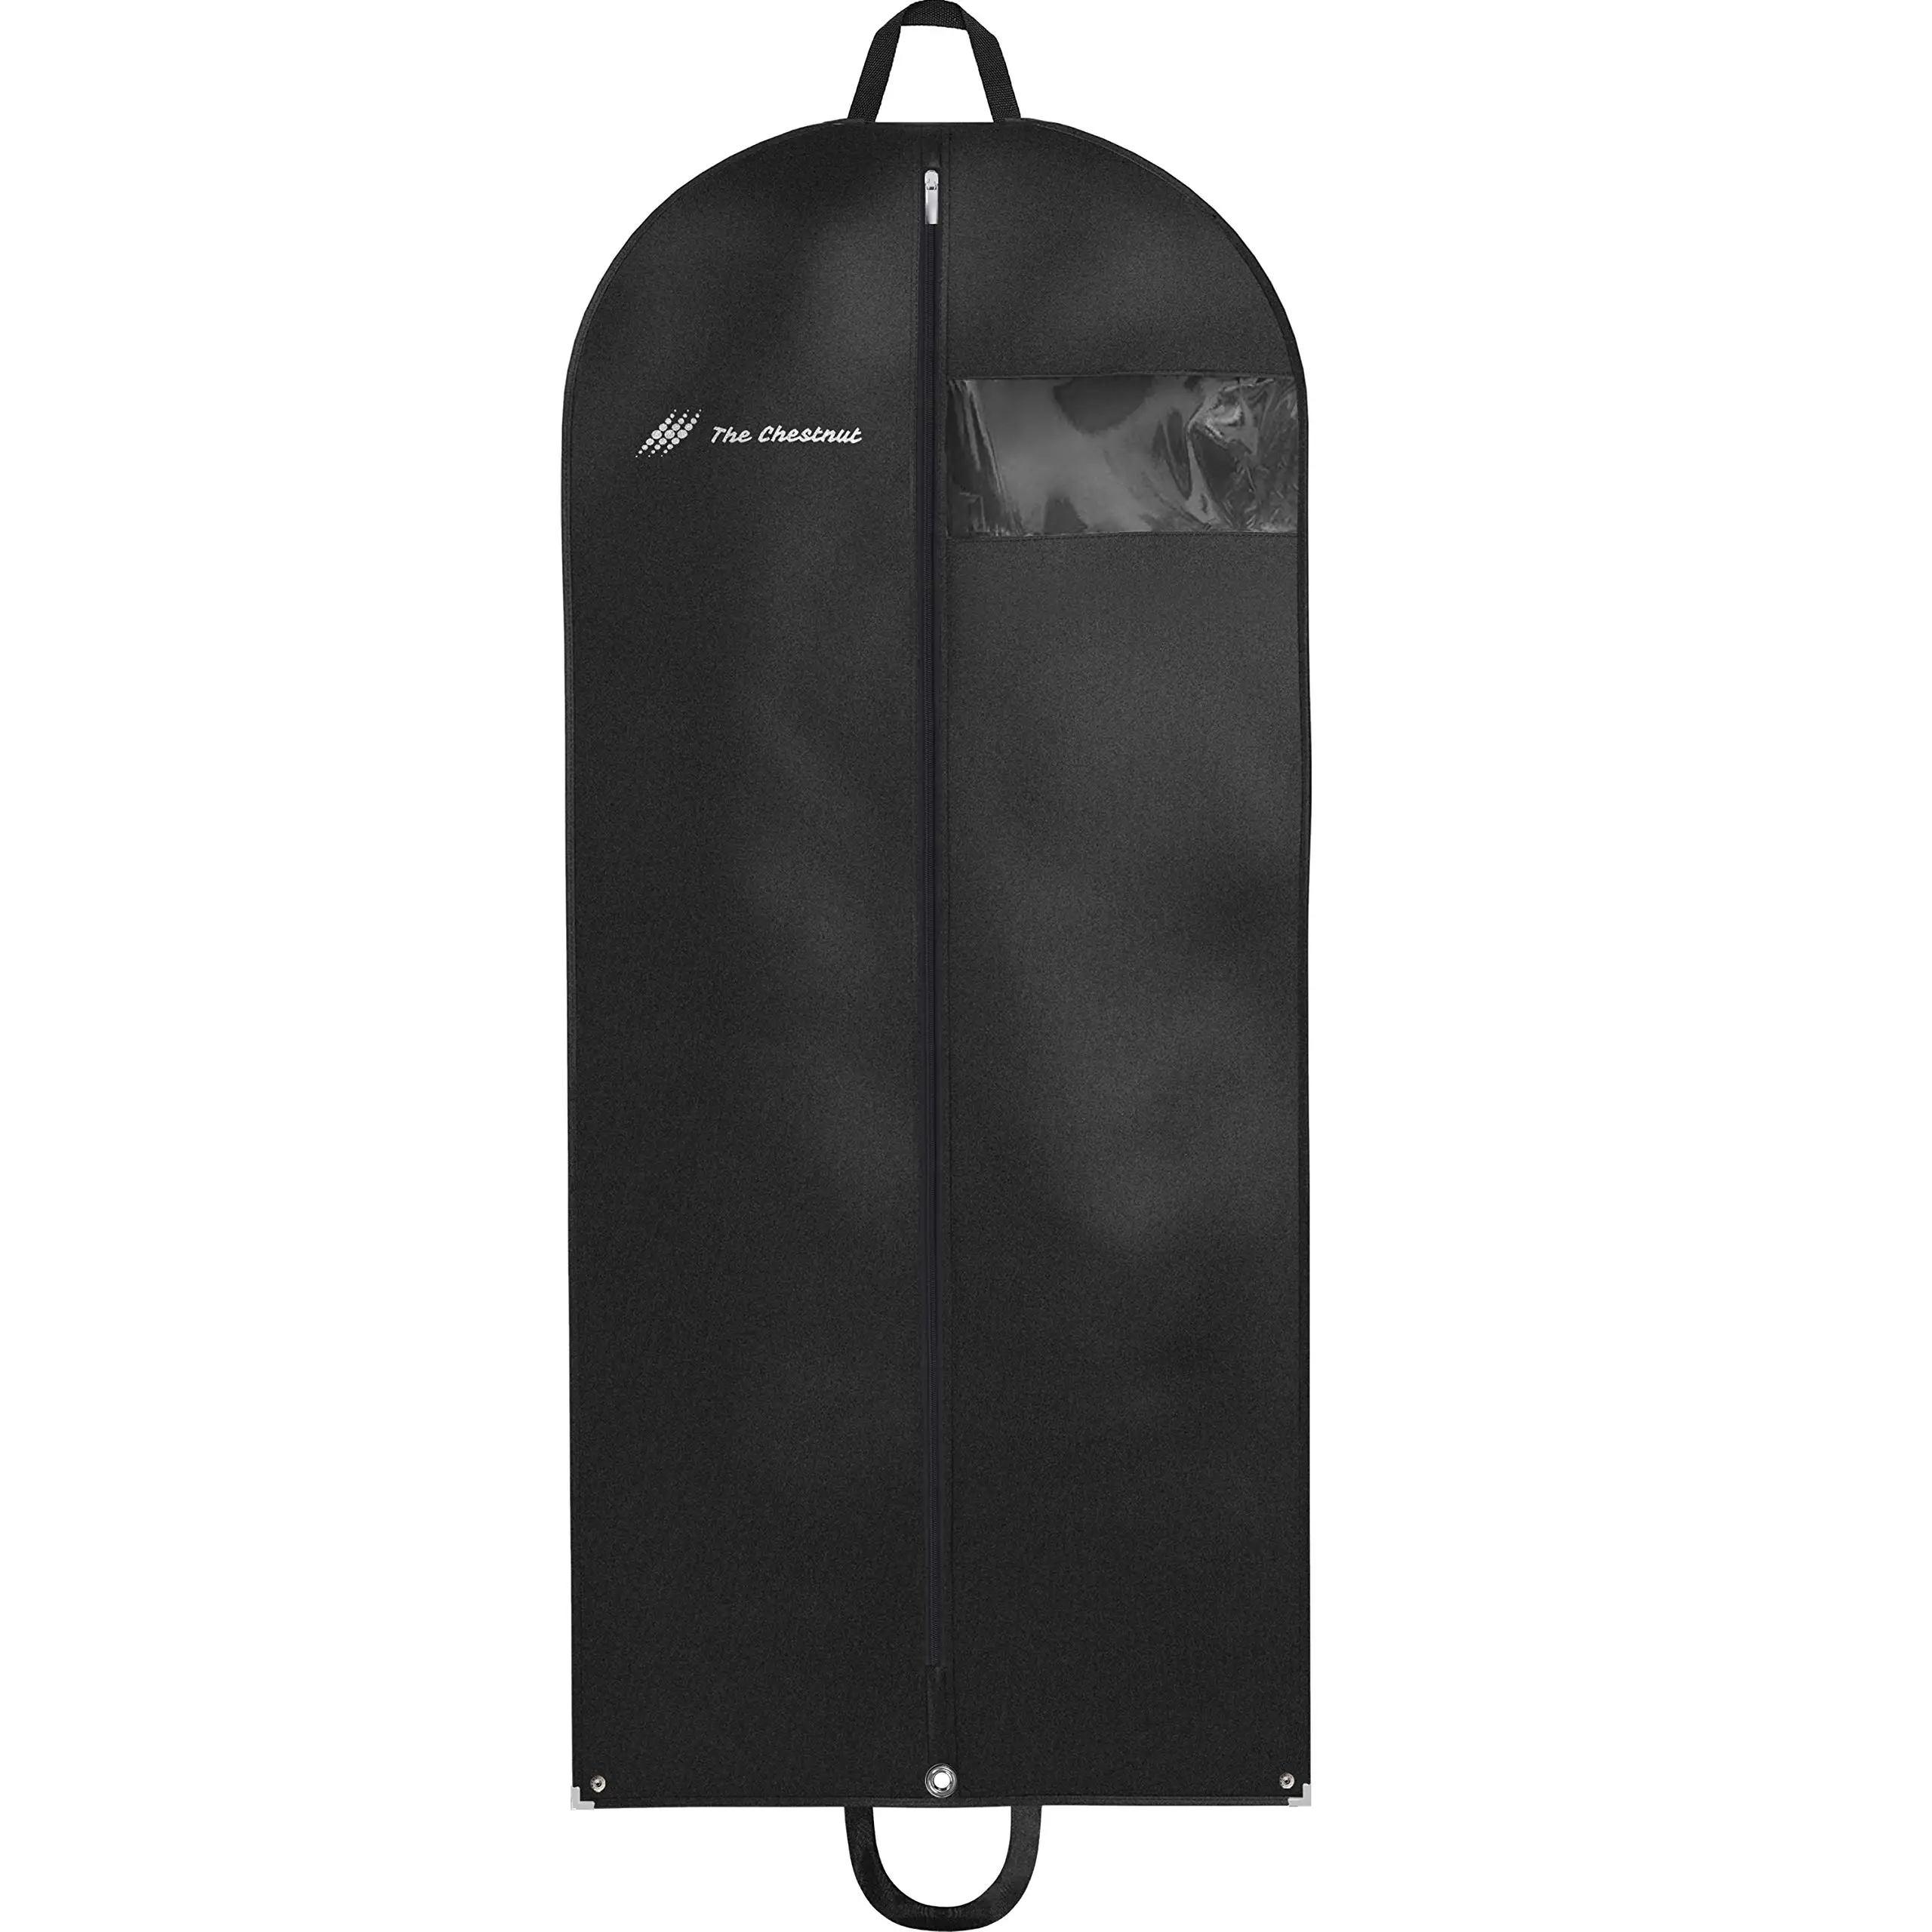 Non Woven Suit Cover Garment Bag Wedding Dress Cover - China